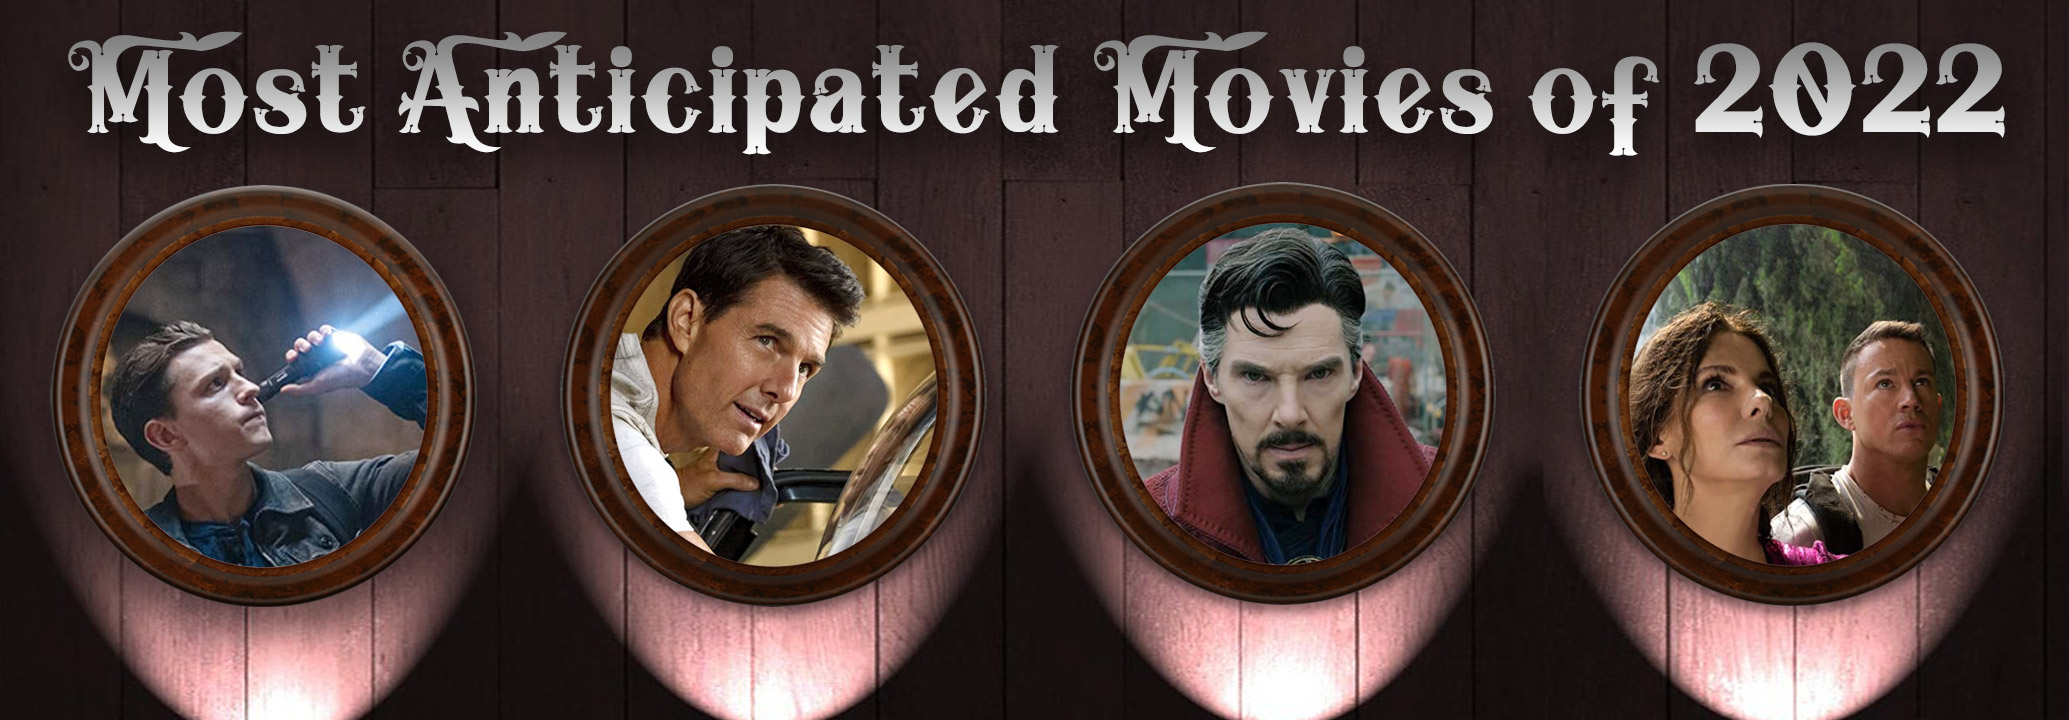 Most Anticipated Movies of 2022